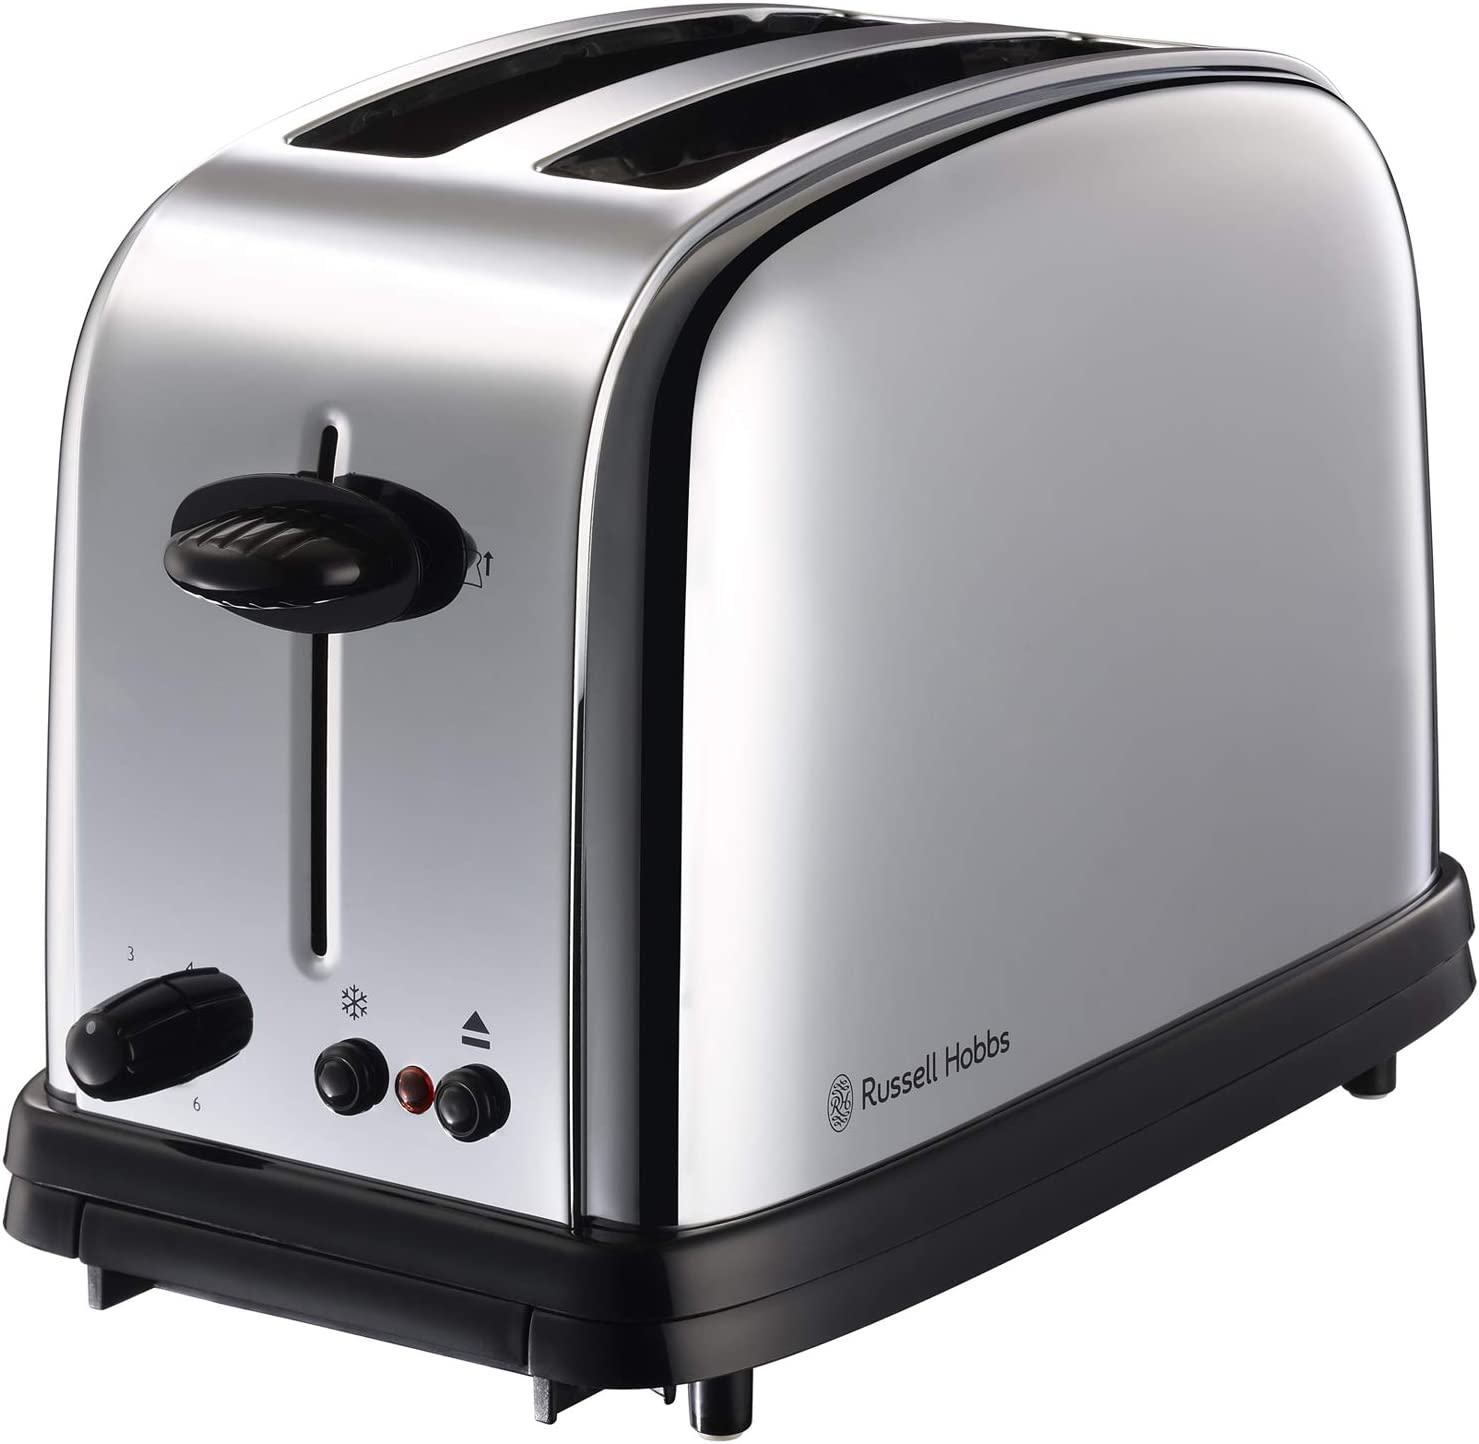 Russell Hobbs 13766 2-Slice Toaster Classic Polished Stainless Steel